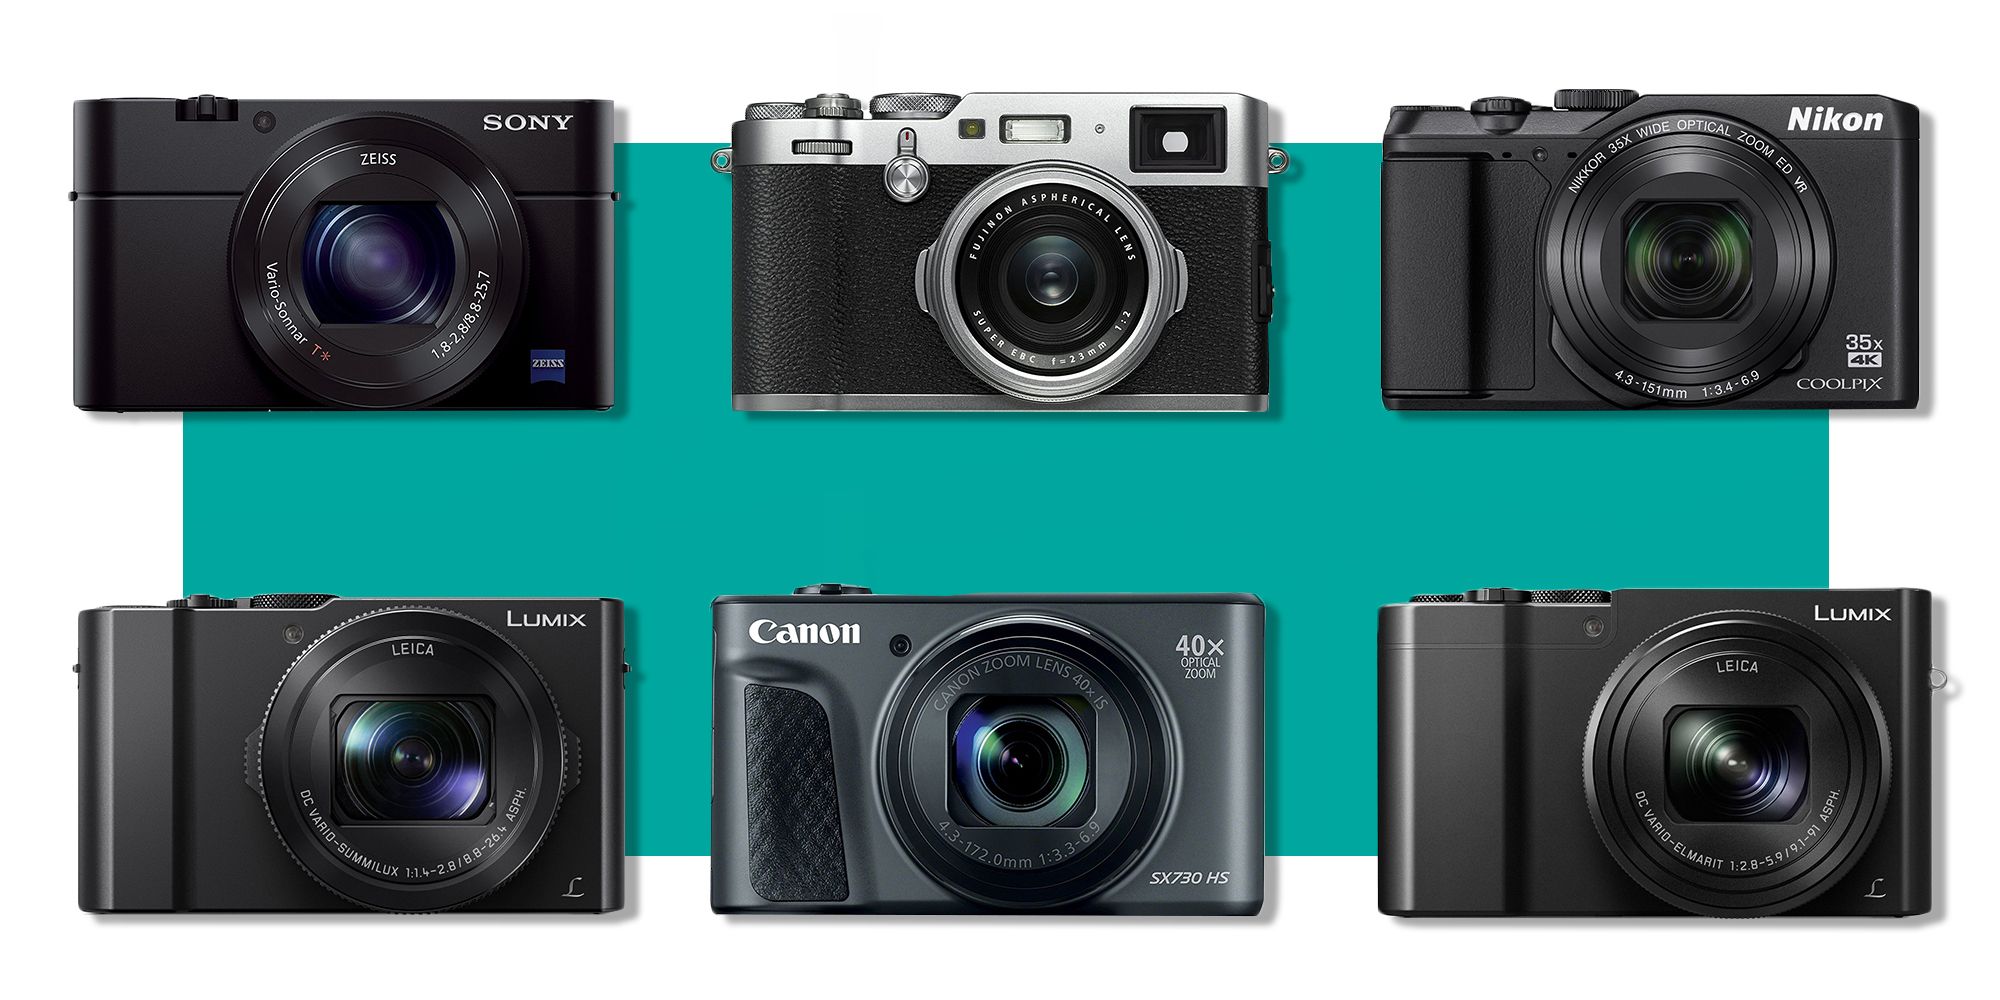 Top condoom Delegatie 10 Best Compact Cameras for 2018 - Top-Rated Small Digital Camera Picks